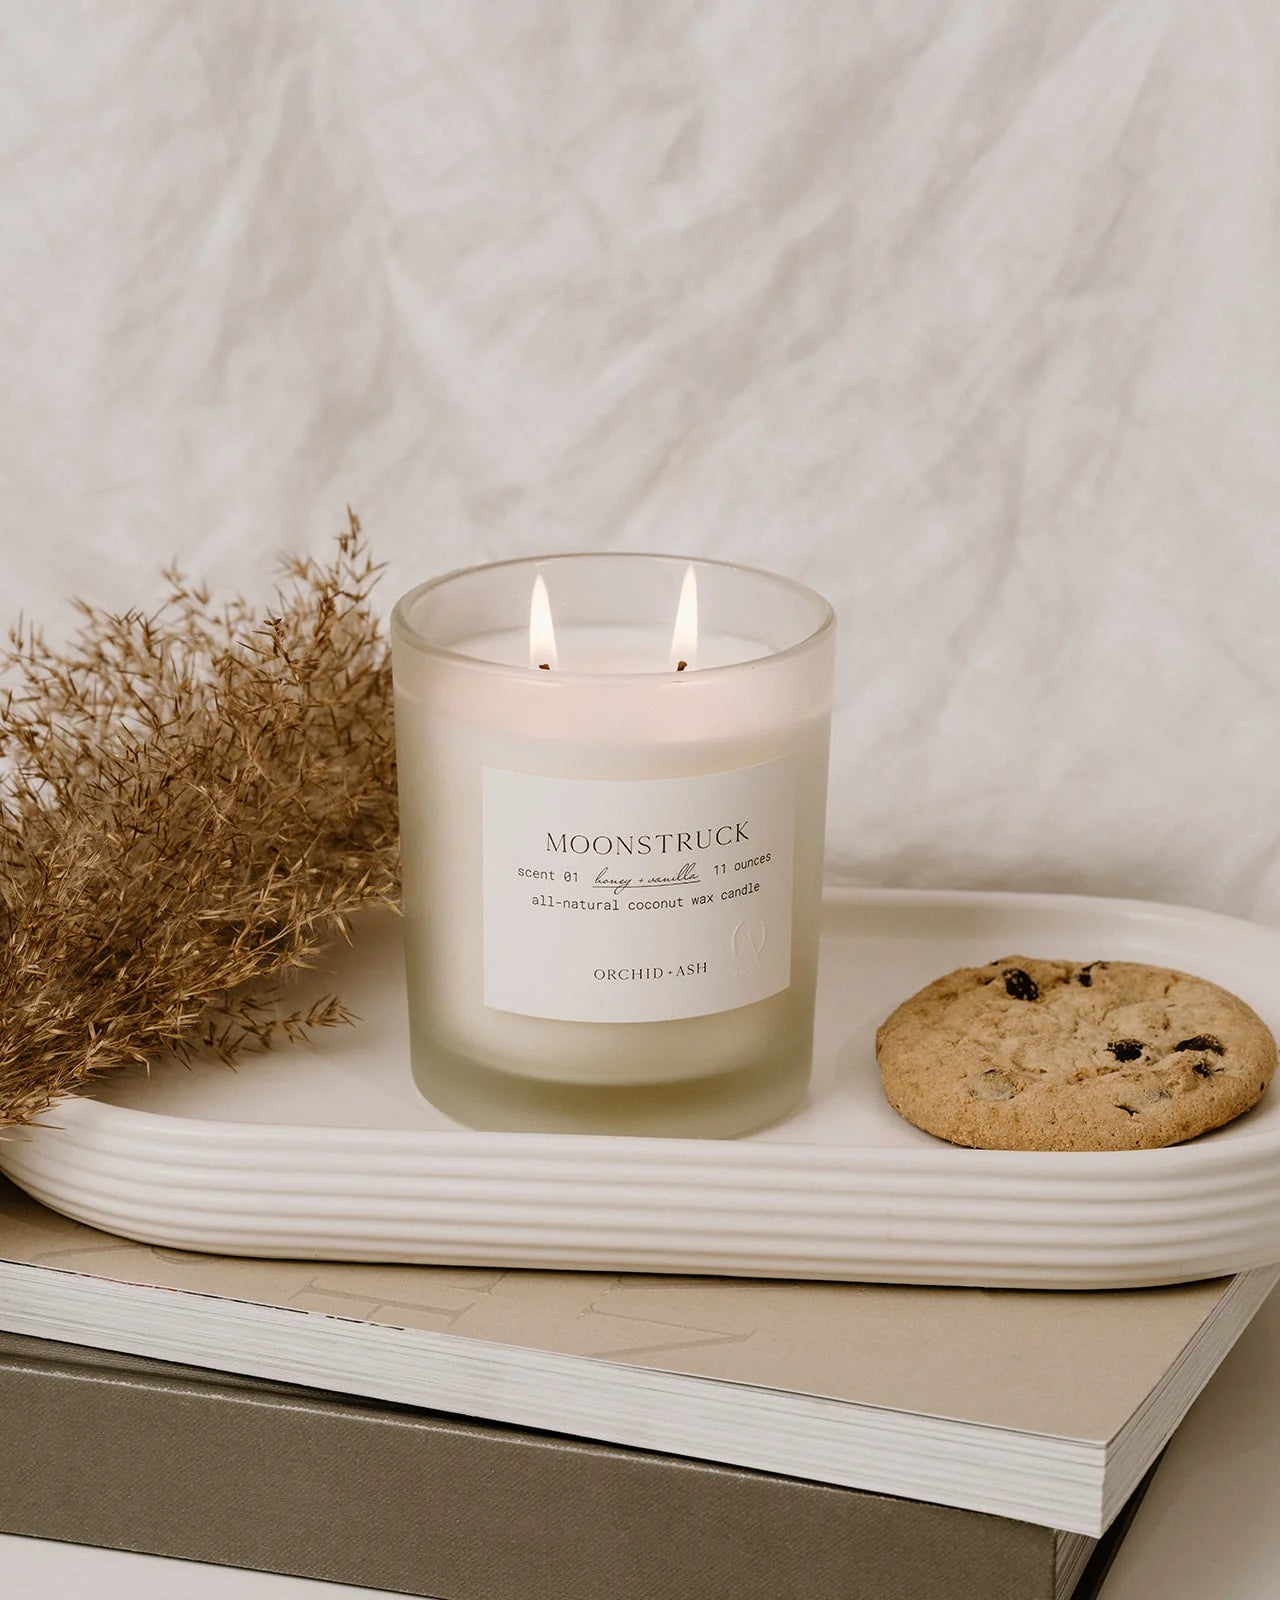 Spice Ash Scented Candle